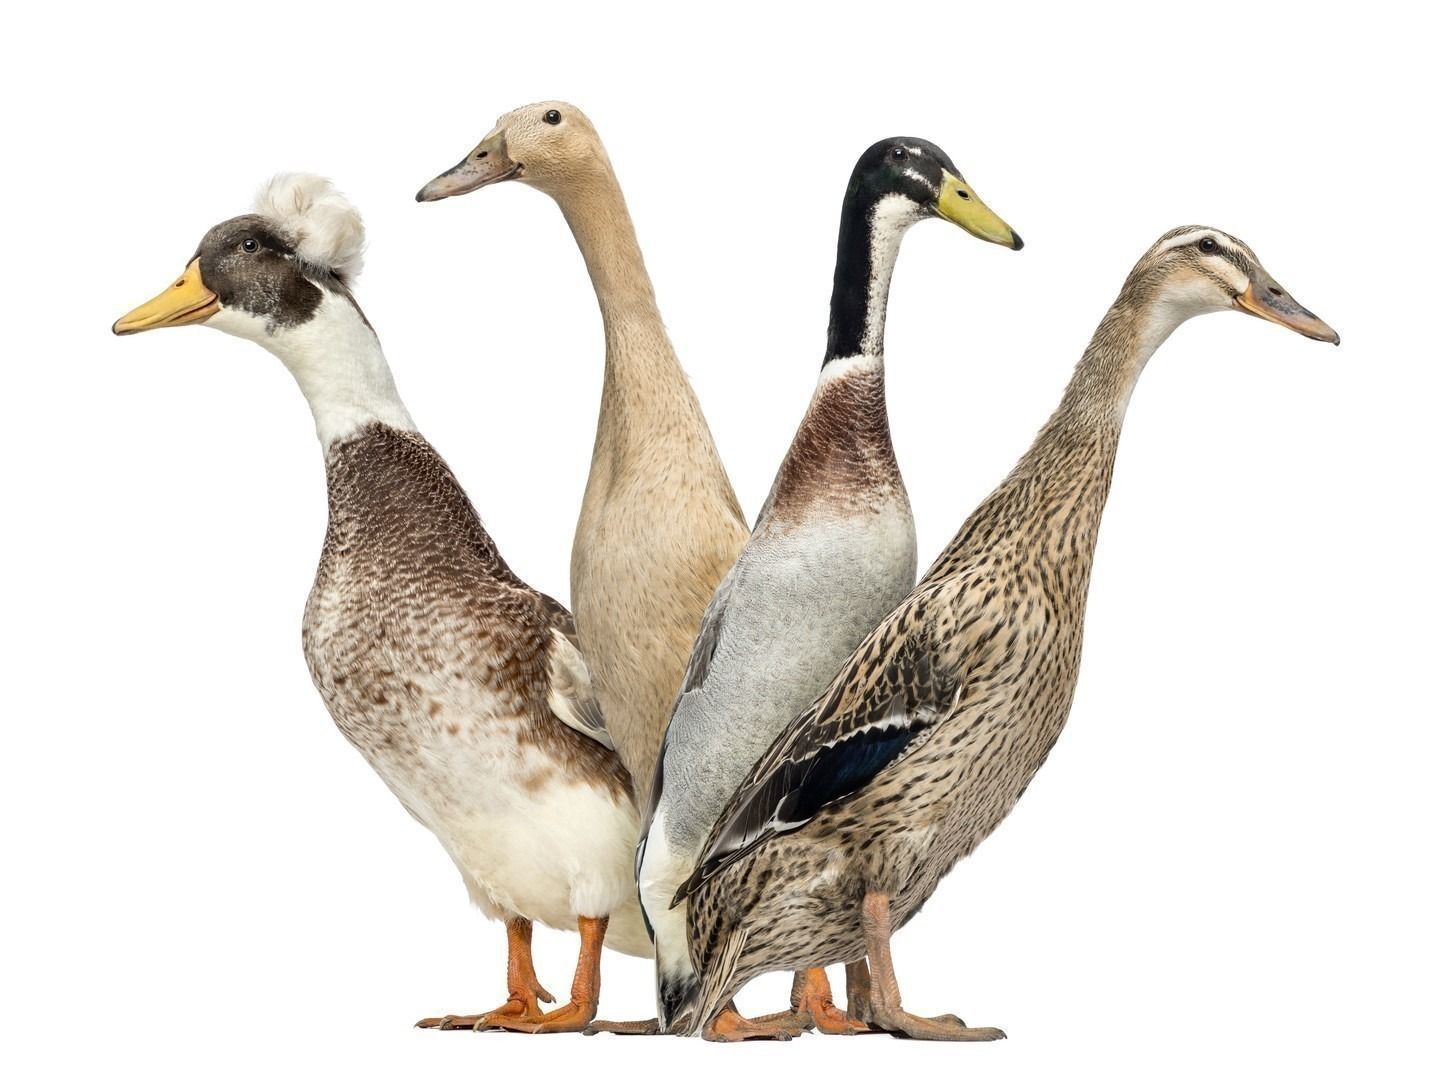 Side view of a Group of Ducks looking left and right, isolated on white